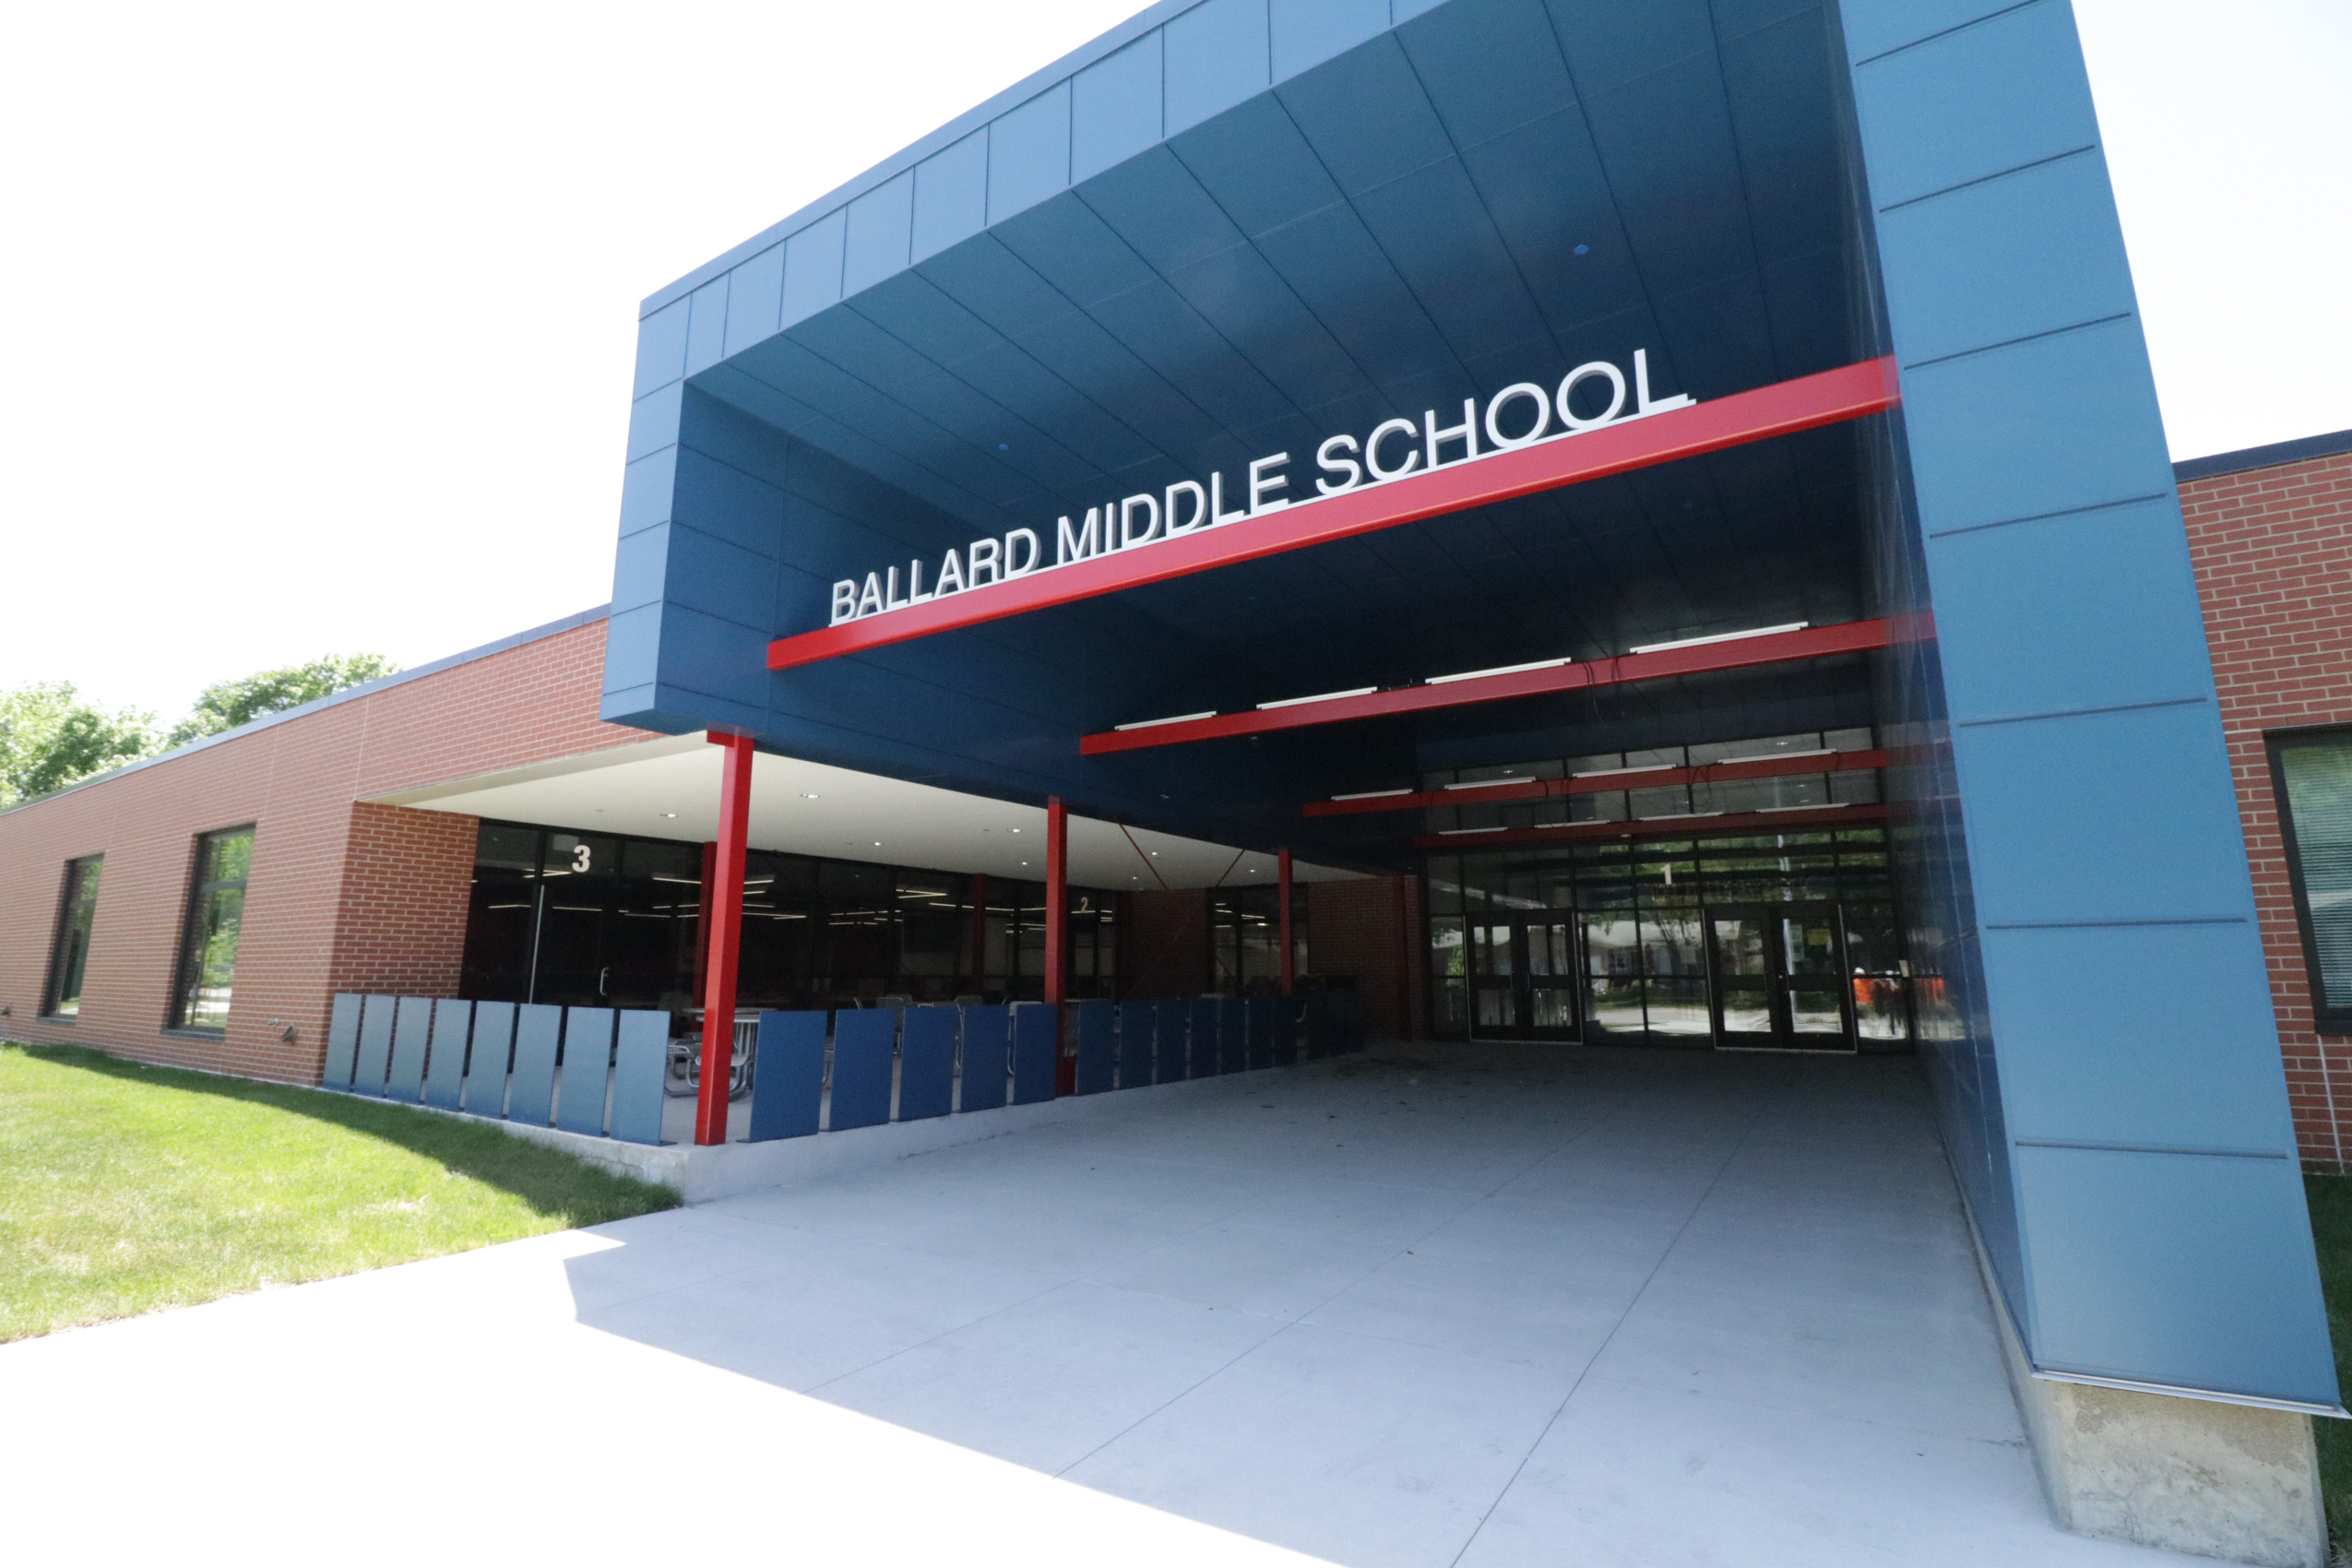 Renovations and Additions Support Students at Ballard Middle School